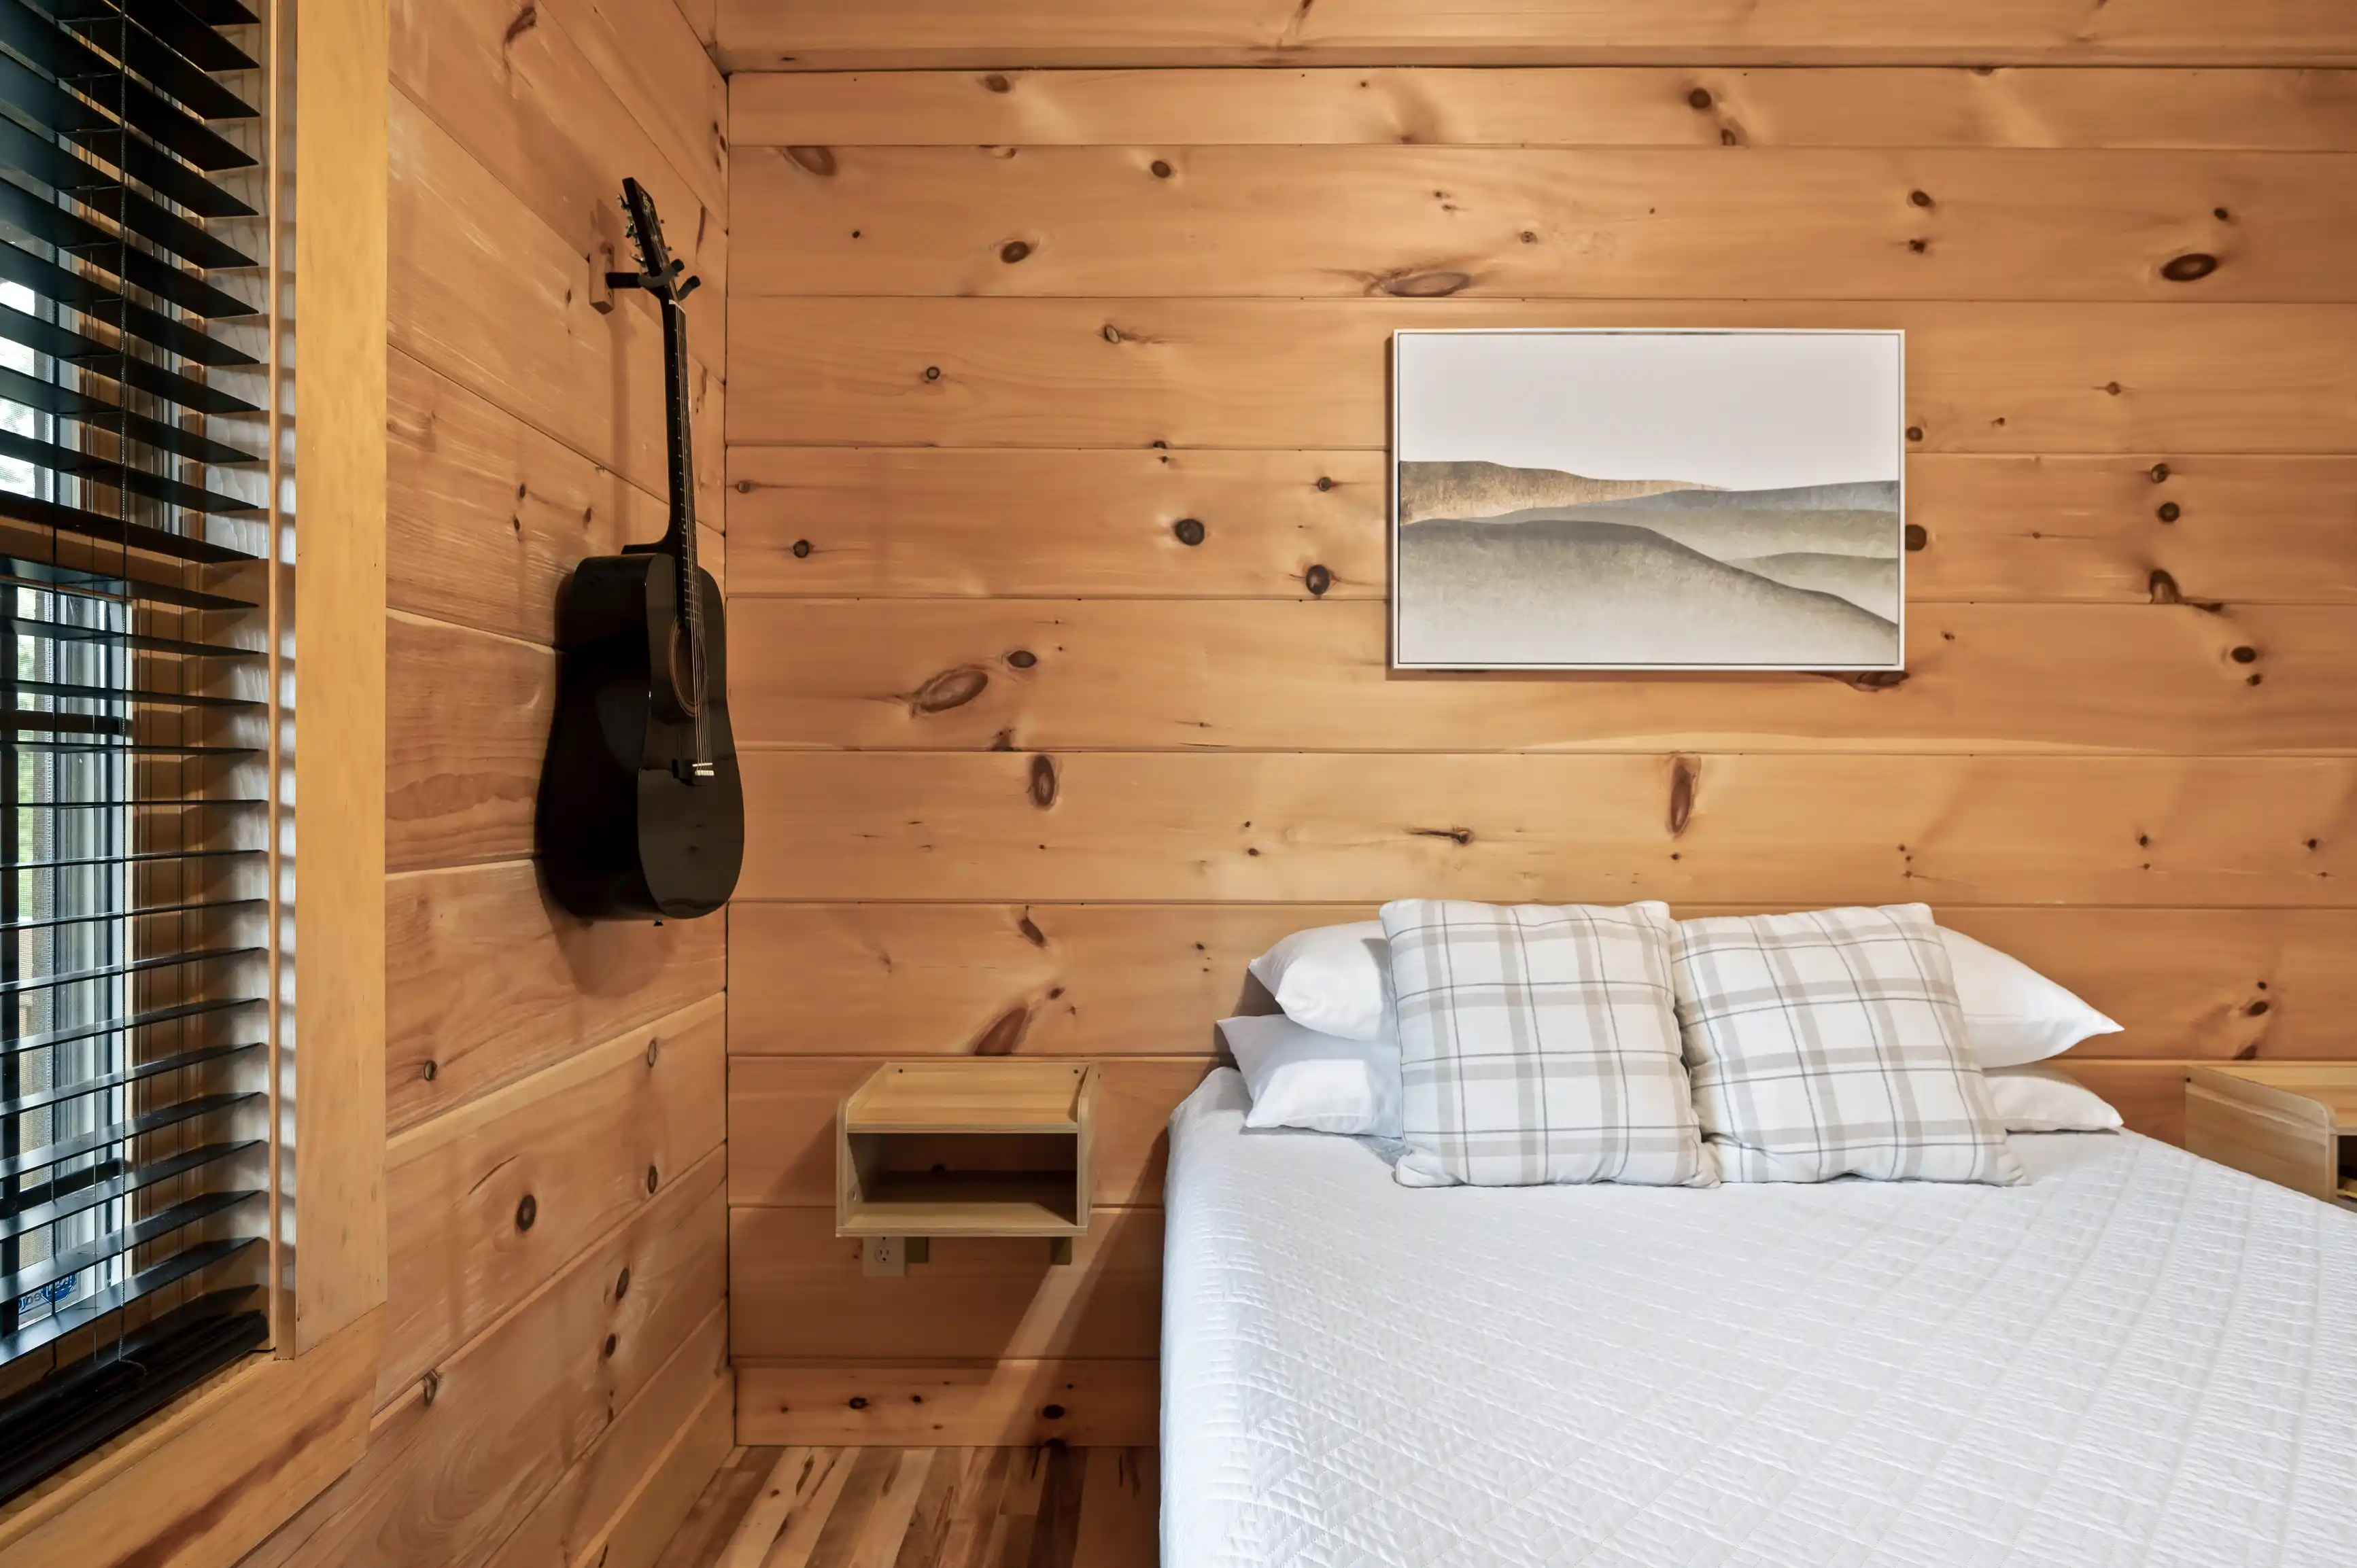 Cozy wooden cabin bedroom interior with a neatly made bed, plaid pillows, a black acoustic guitar on the wall, a framed landscape picture, and closed window blinds.